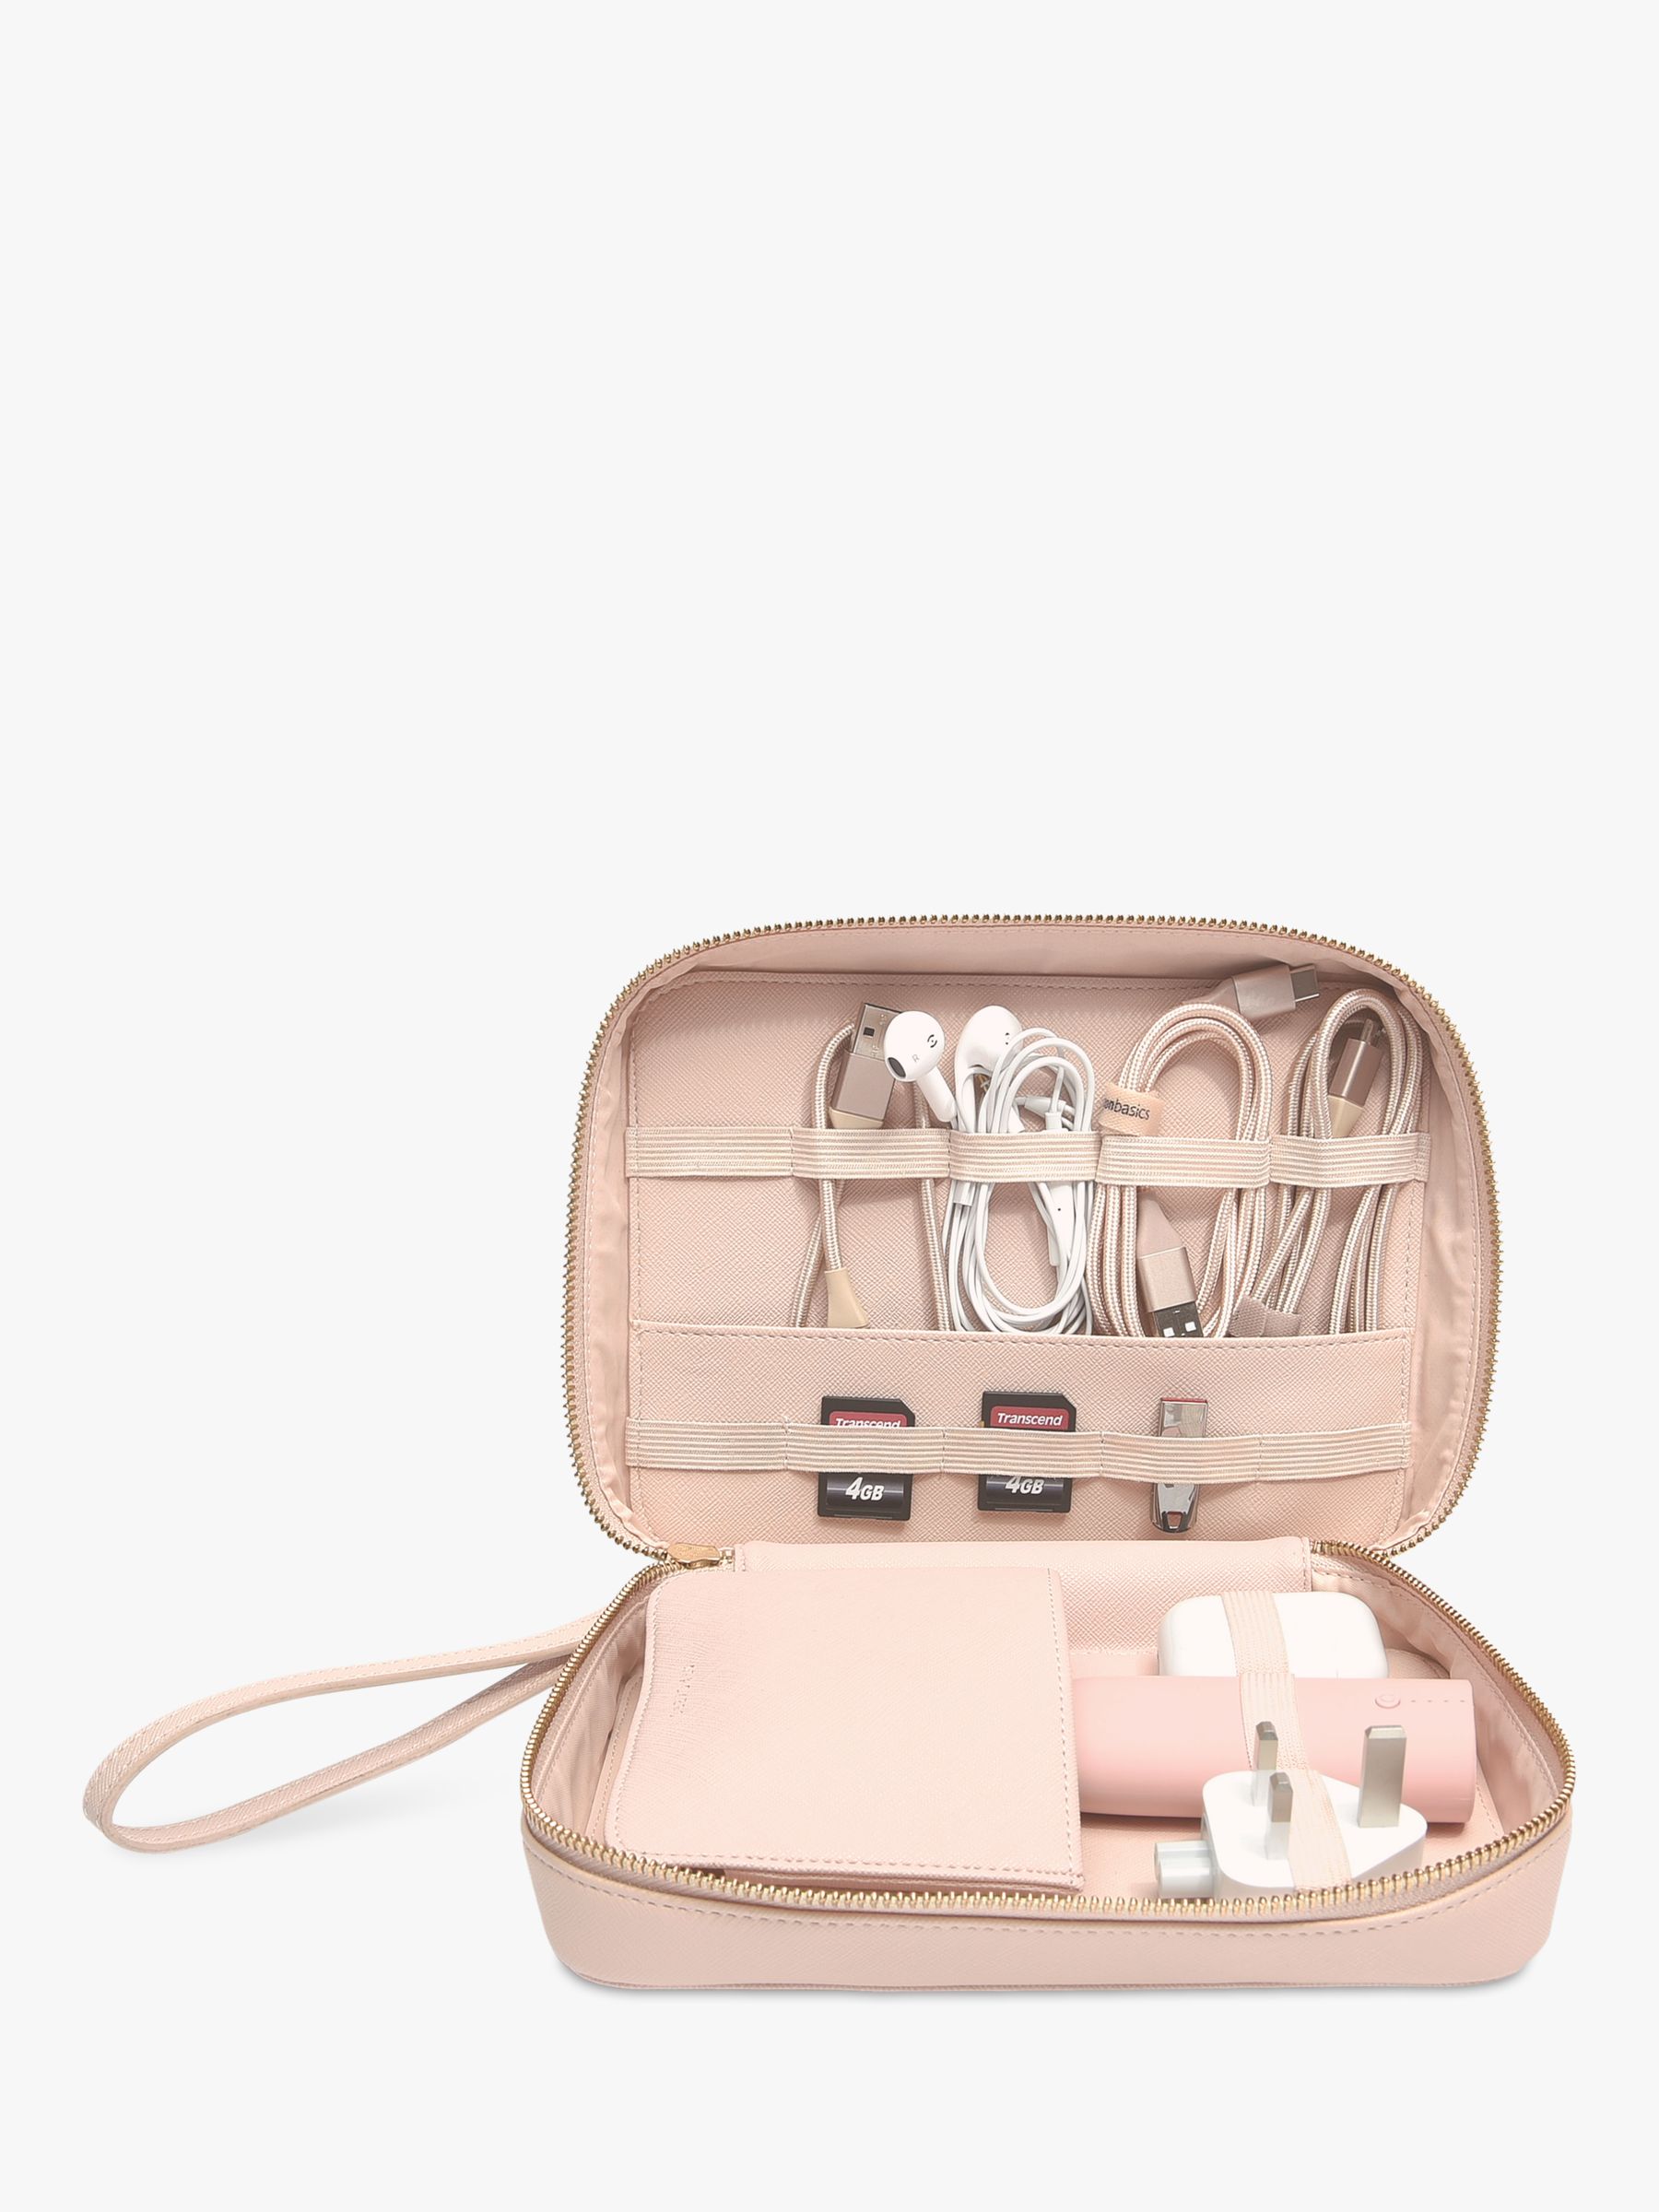 Stackers Stackers Taupe Petite Travel Jewellery Box RRP £18 John Lewis 